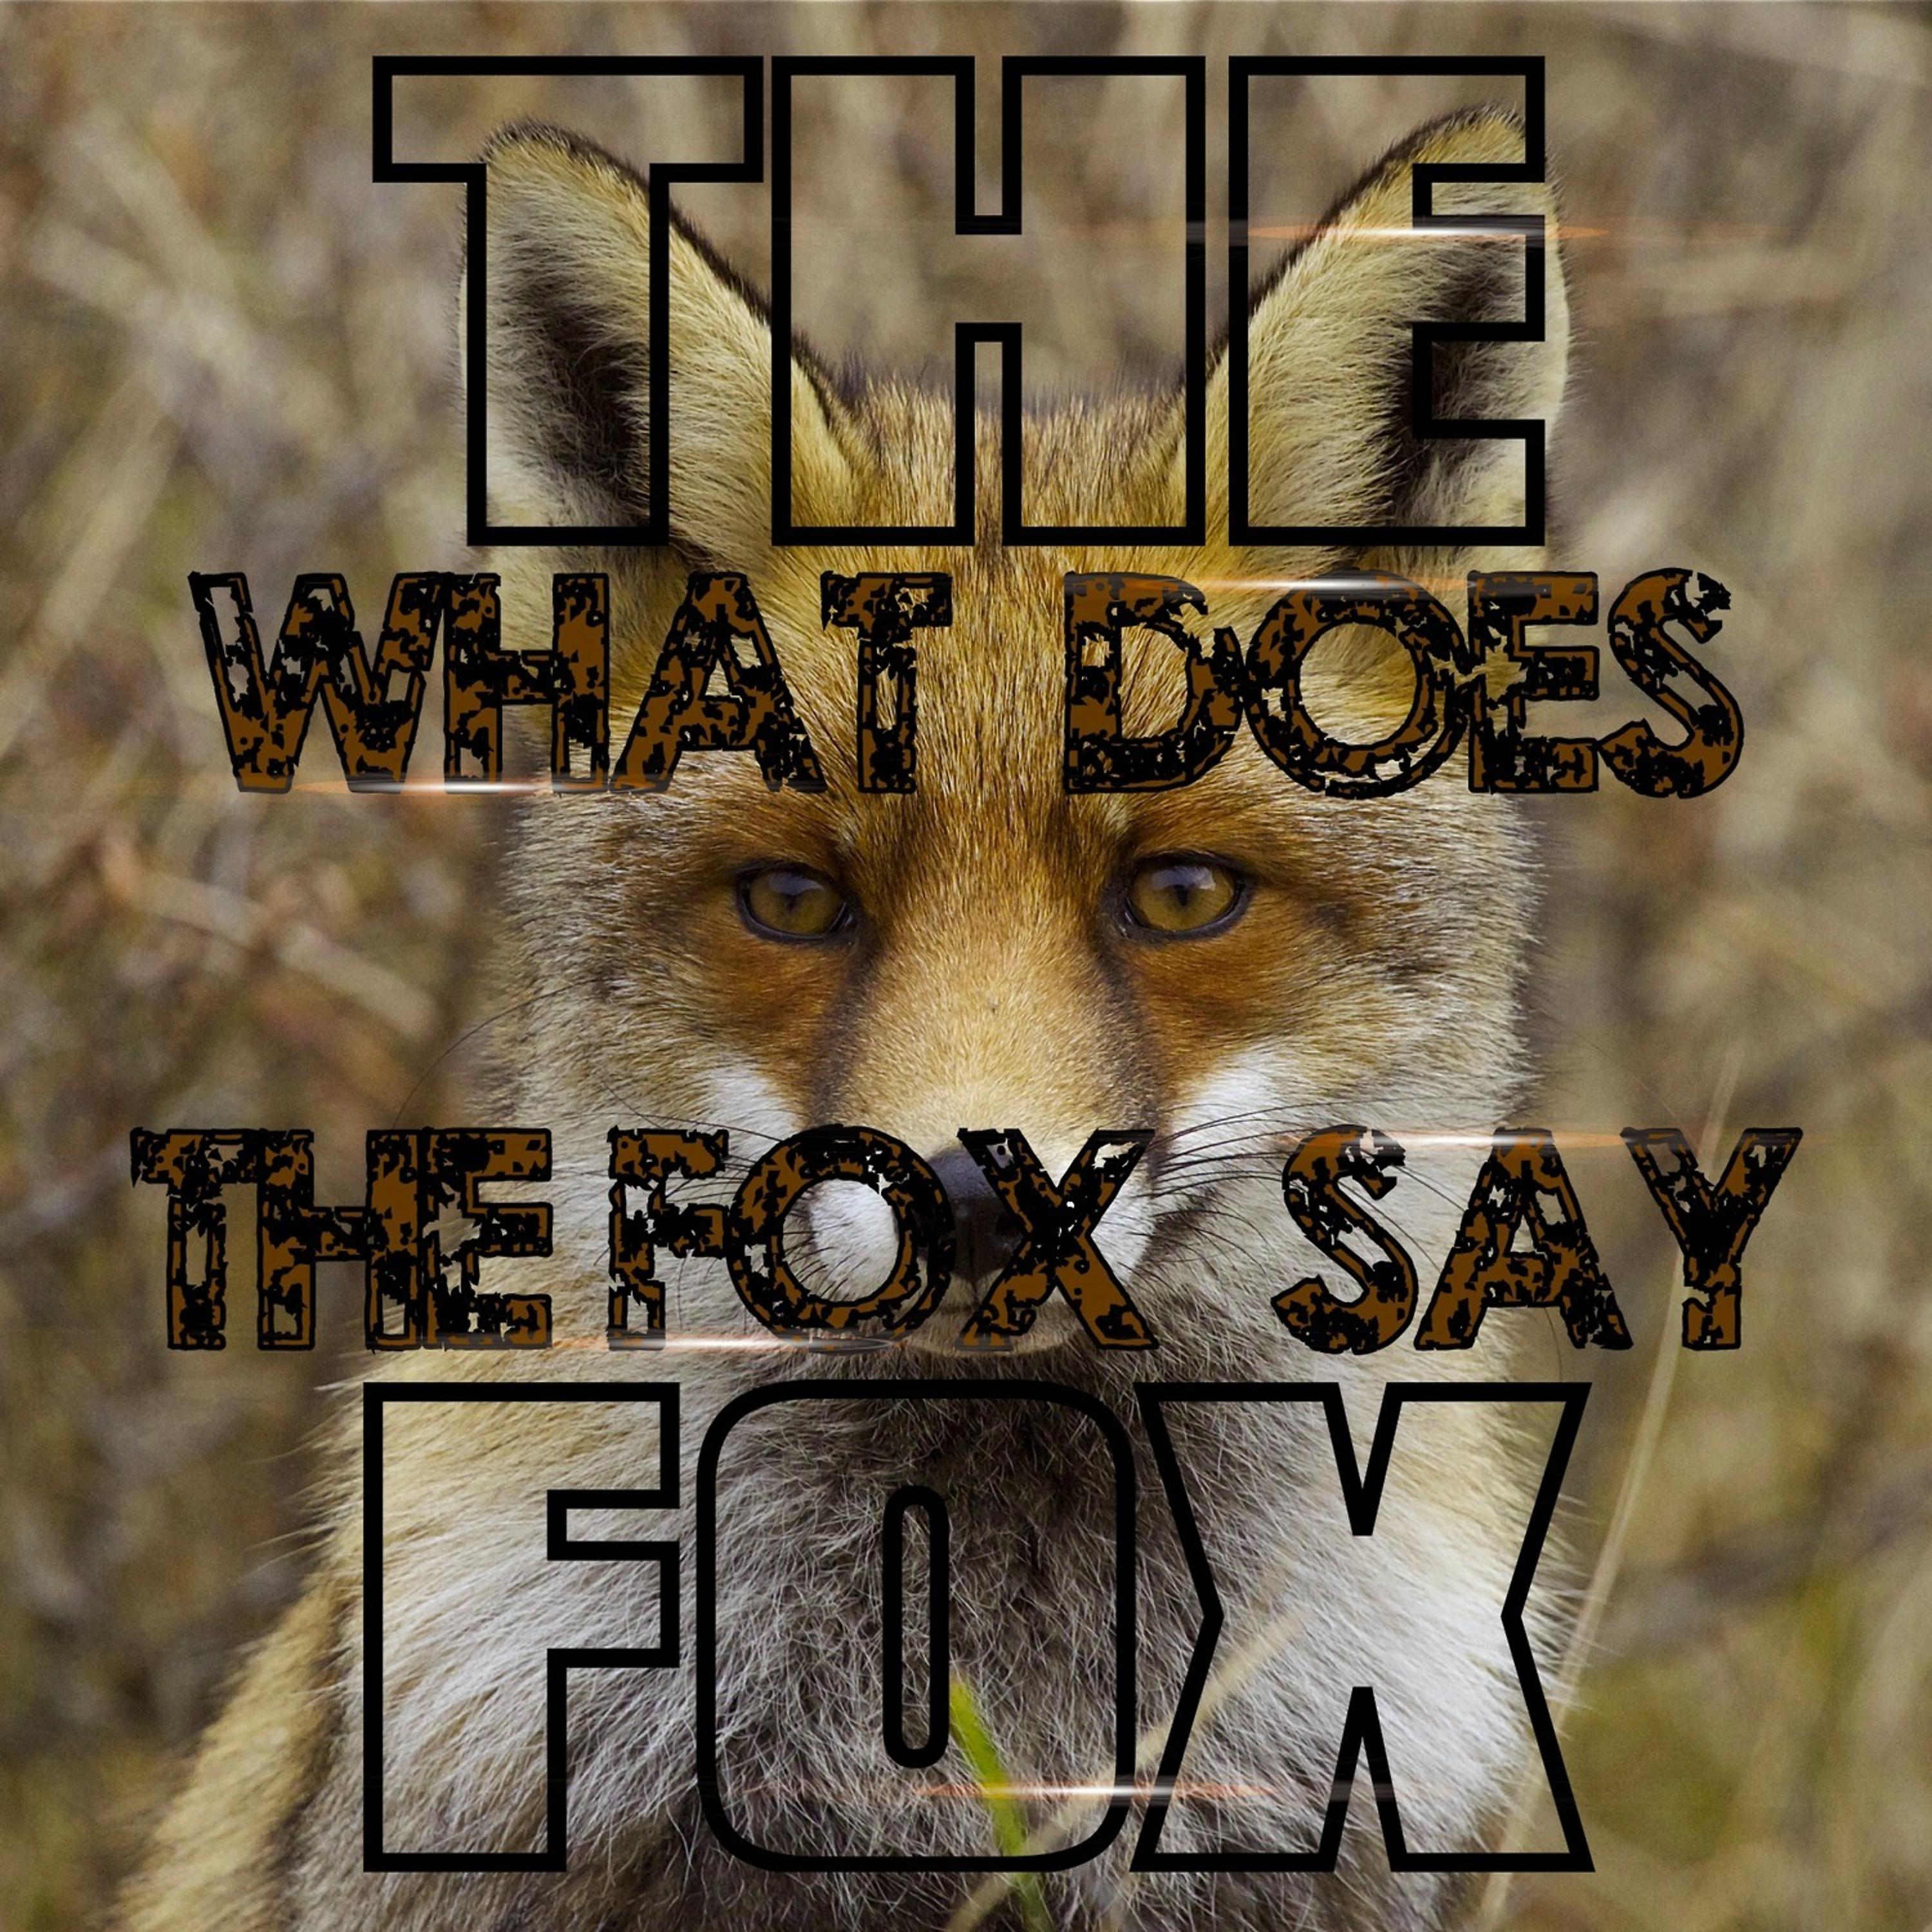 Постер альбома The Fox (What Does the Fox Say)